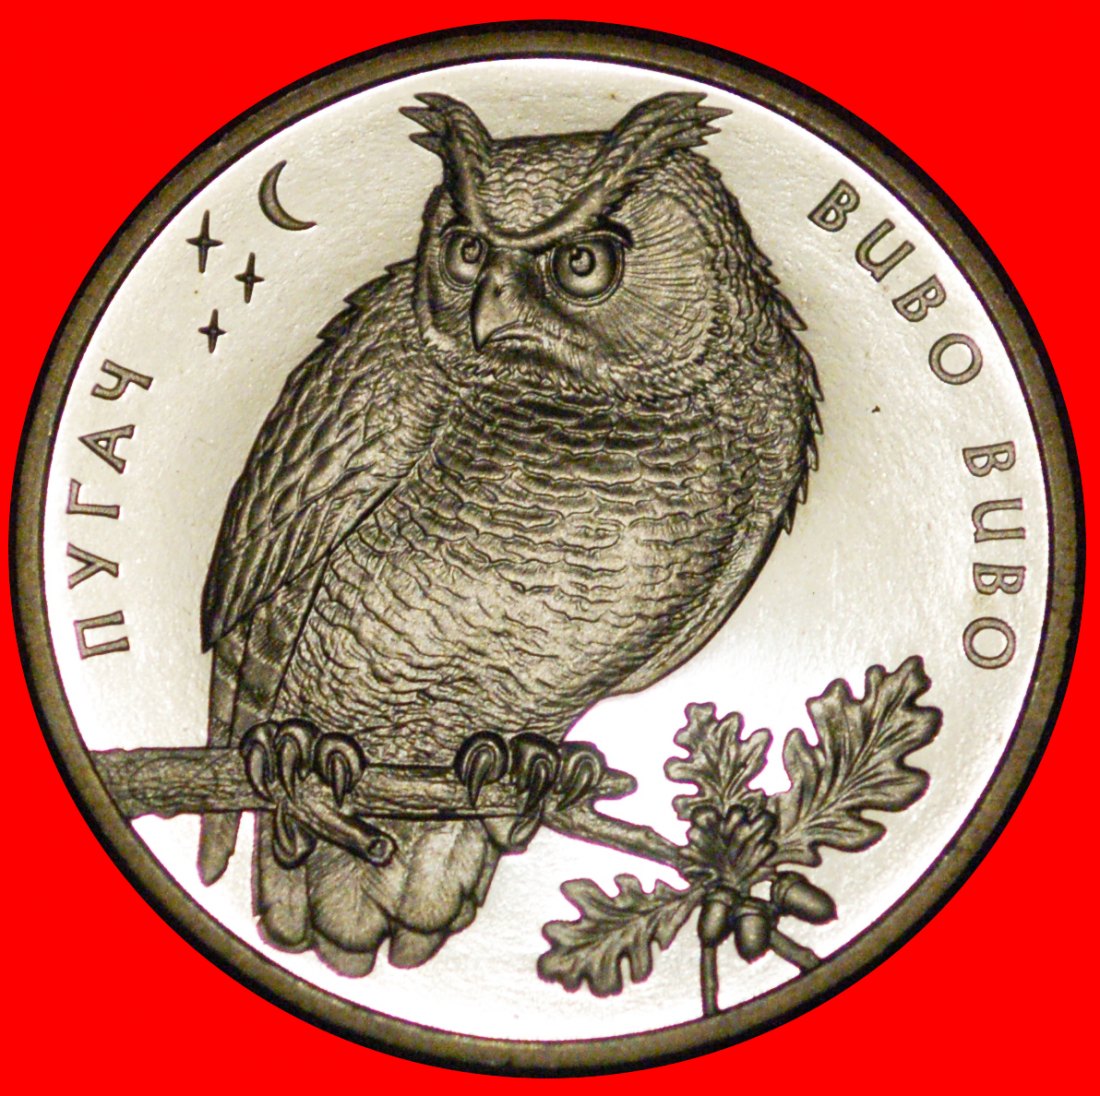  * BIRDS AND BUTTERFLY EAGLE-OWL:ukraine (ex. the USSR, russia)★2 GRIVNAS 2002★LOW START★ NO RESERVE!   